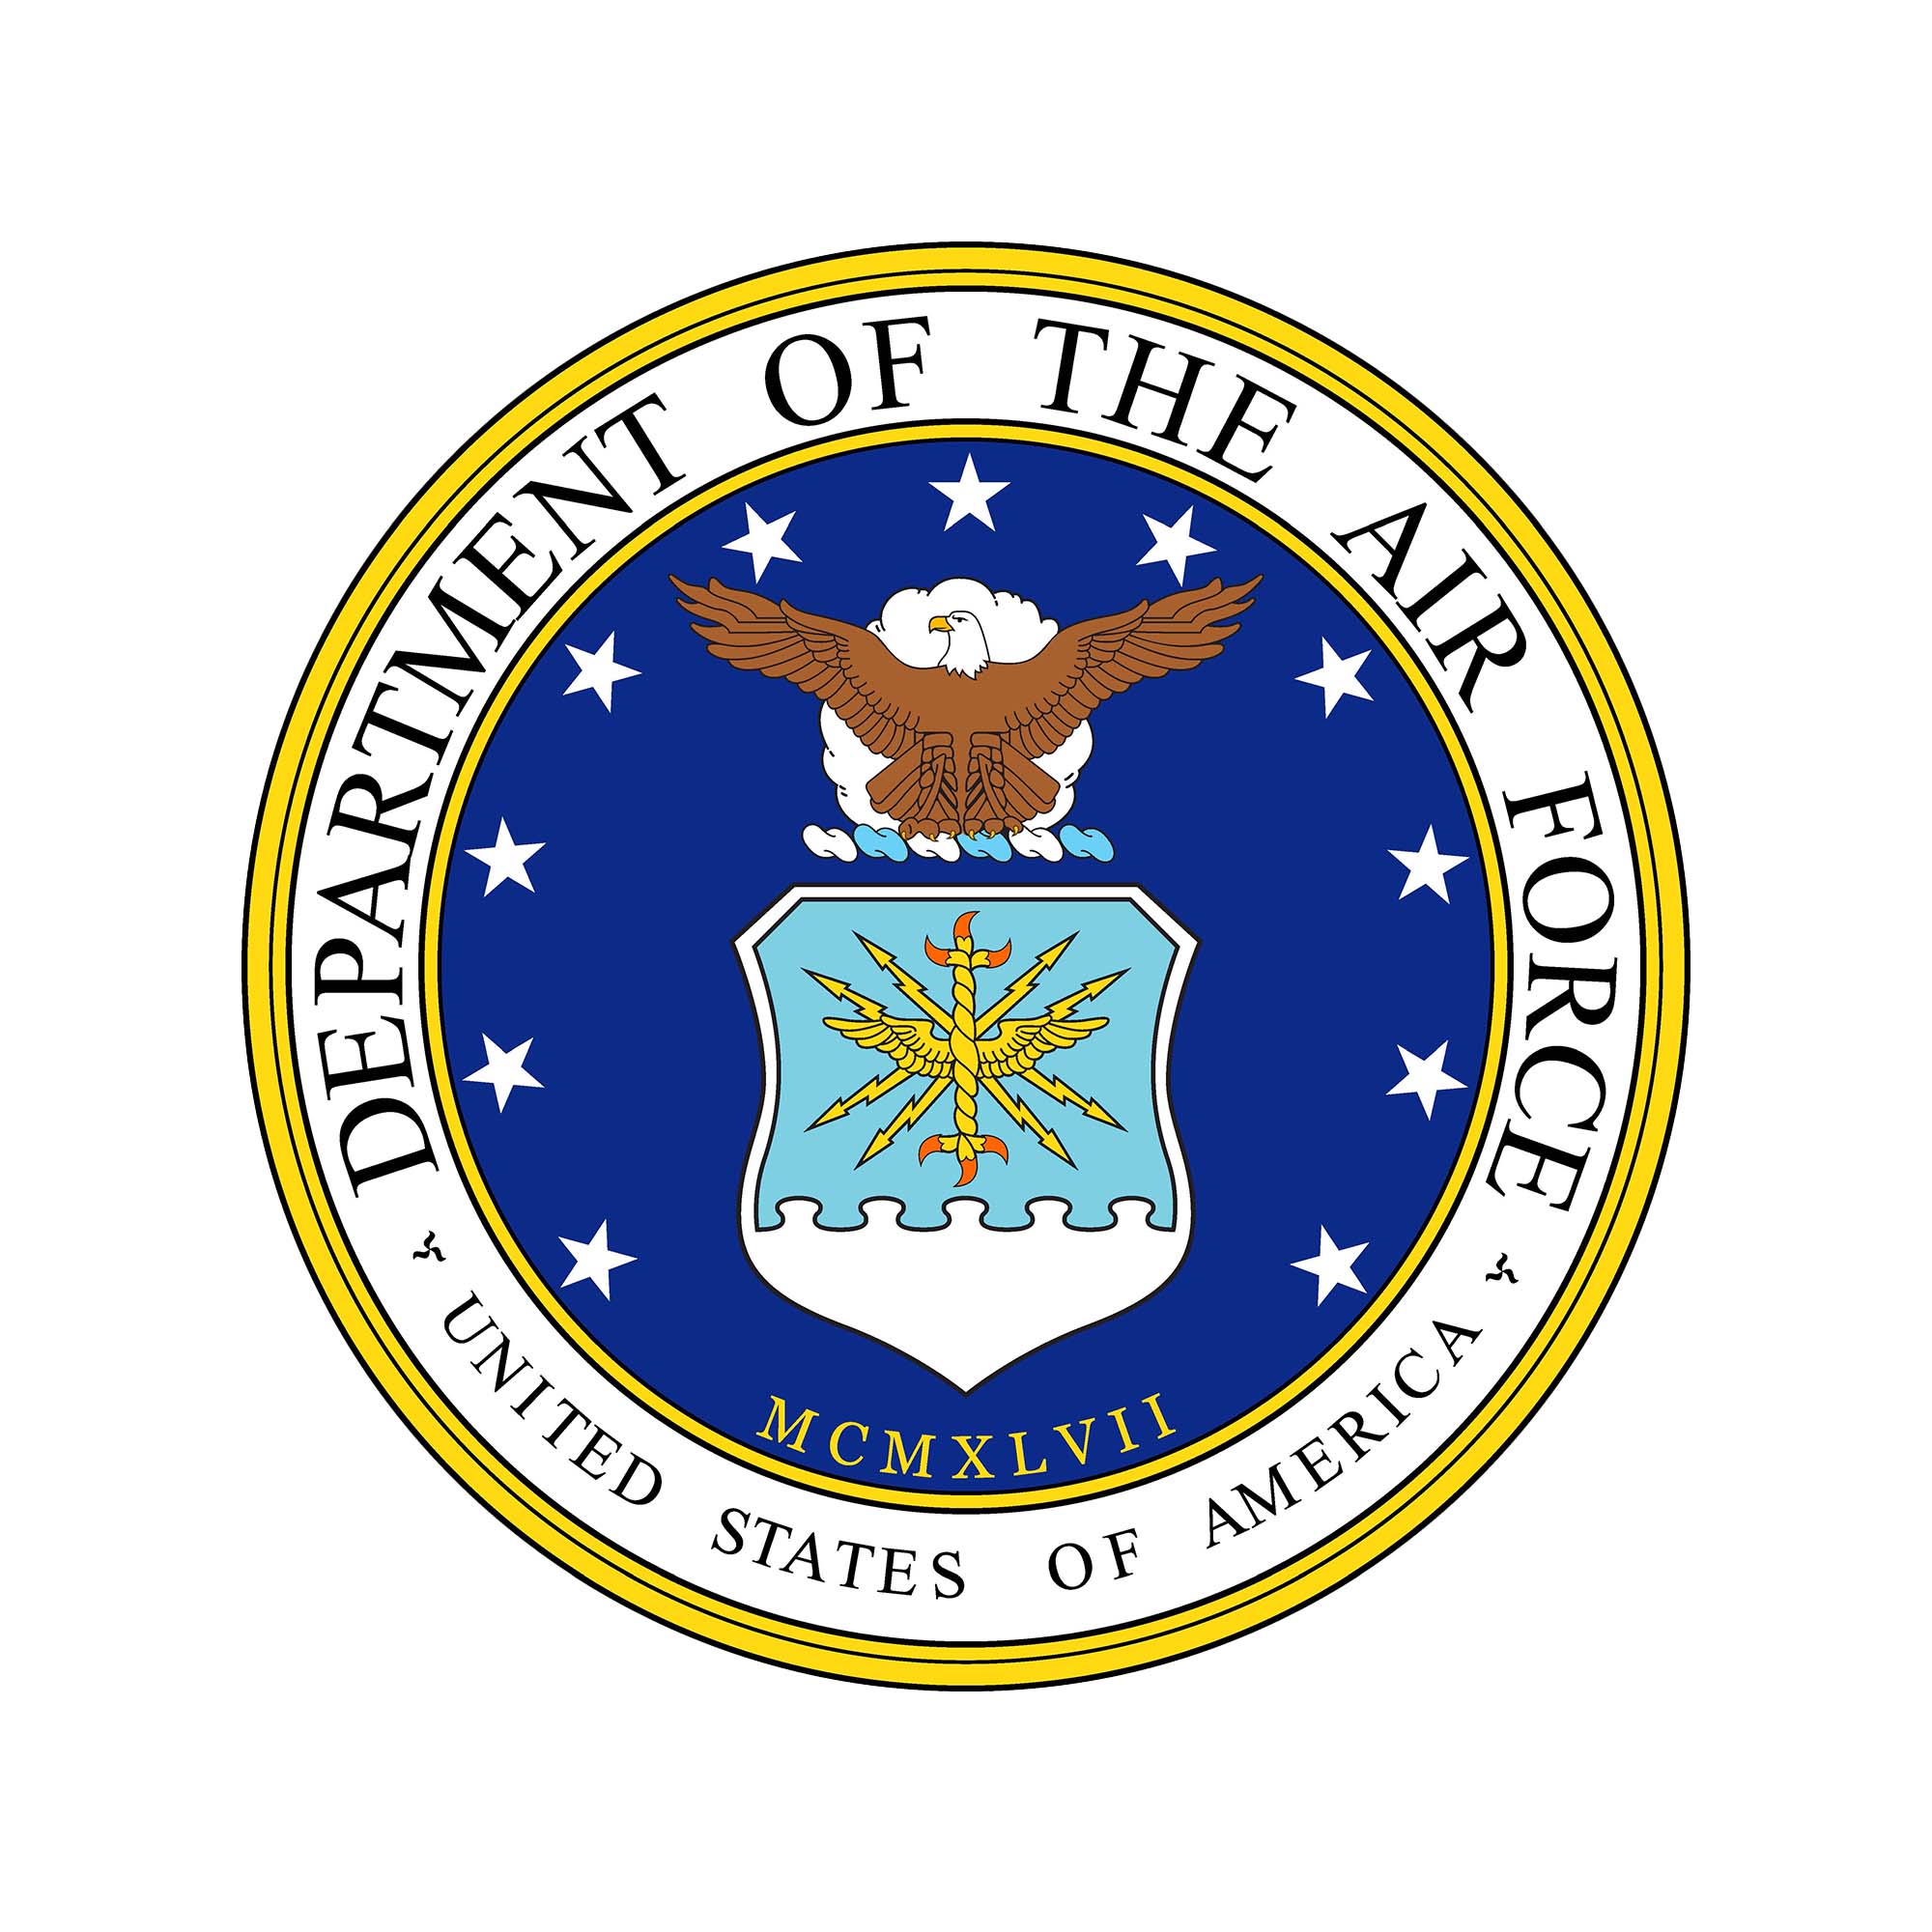 Emblems of the United States Air Force